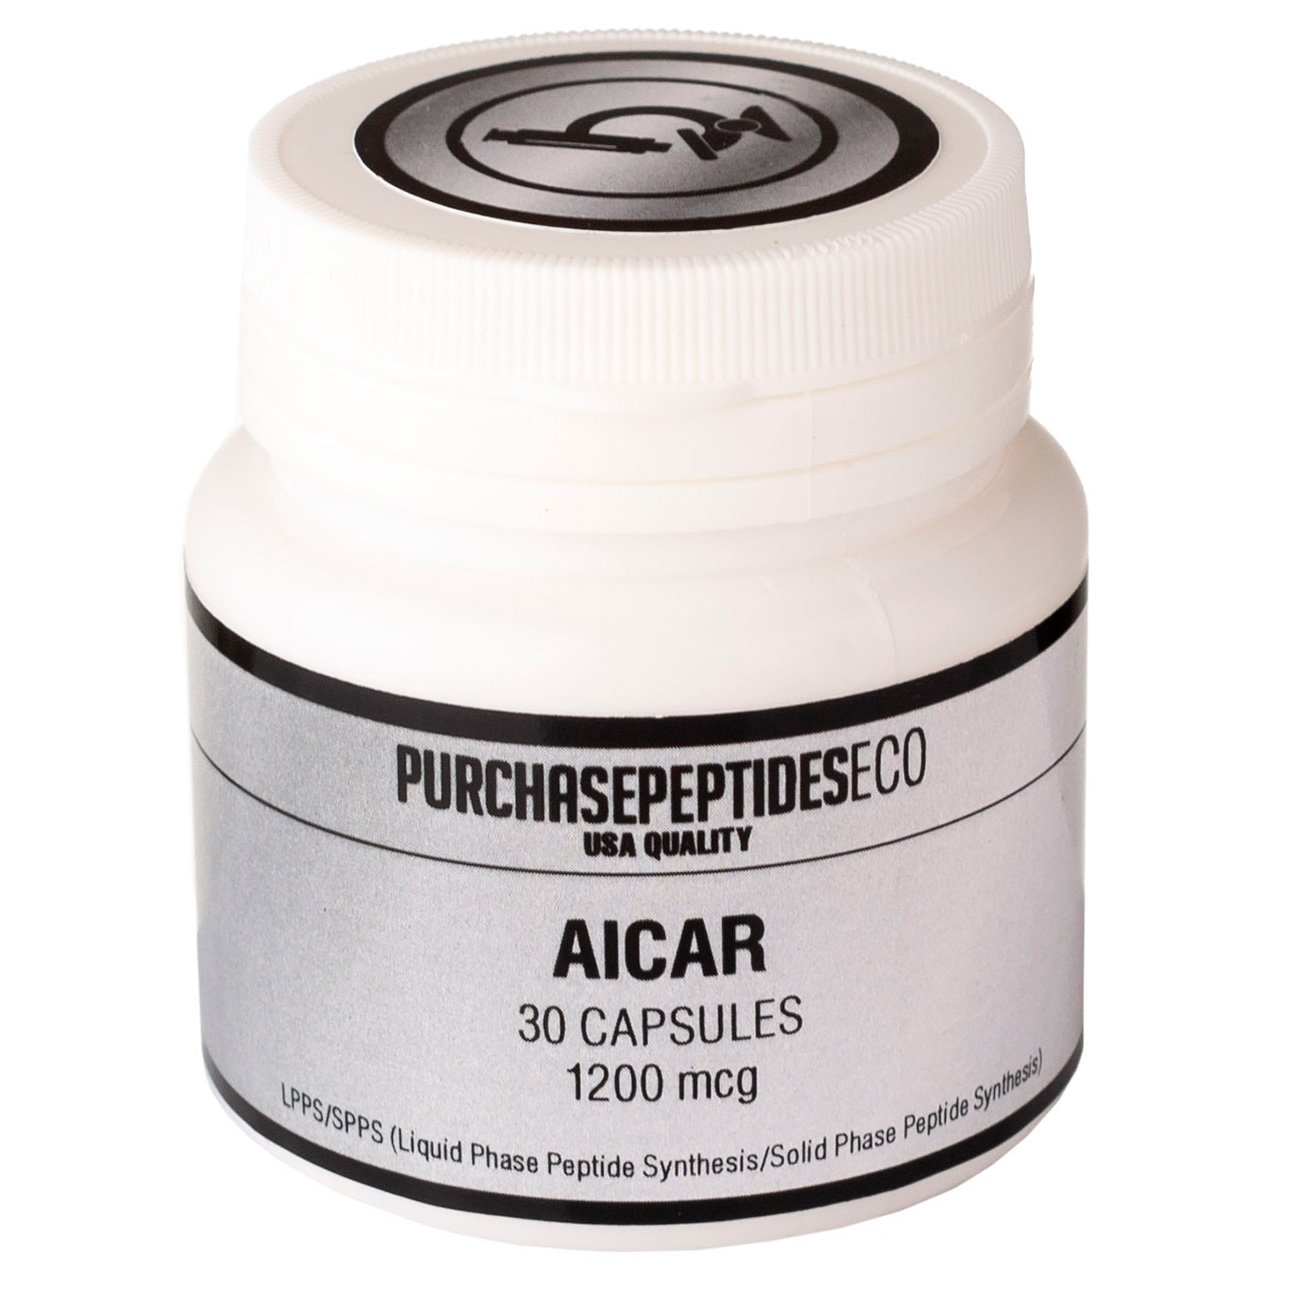 Aicar капсулы,  ml, PurchasepeptidesEco. Peptides. 